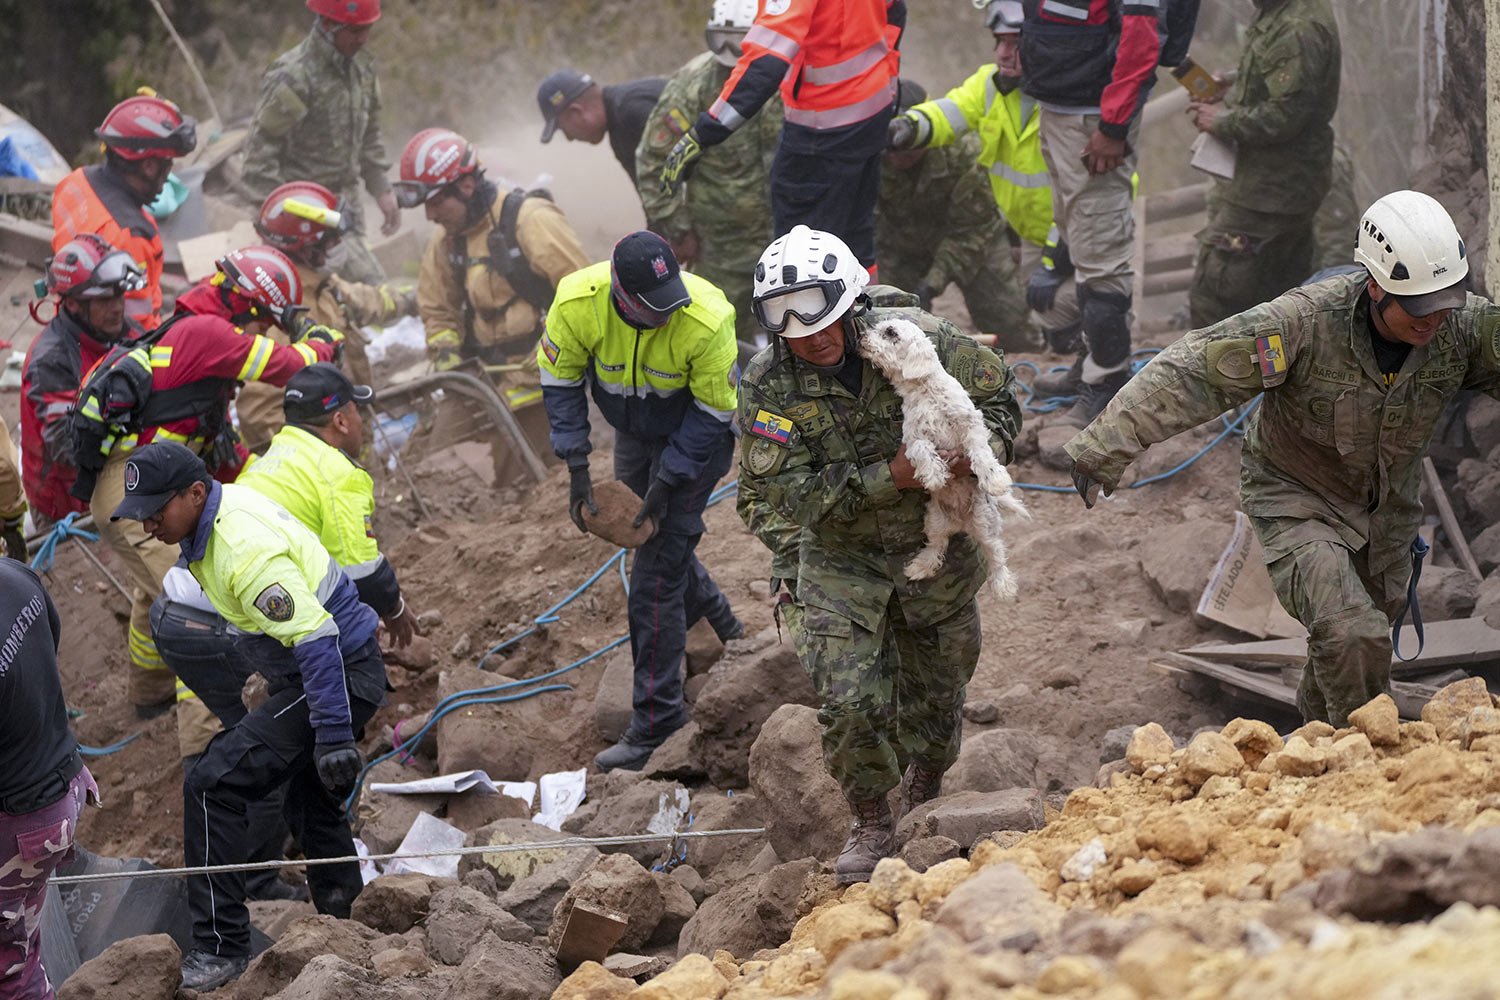  A soldier carries a dog rescued from the rubble of buildings destroyed by a deadly landslide that buried dozens of homes, in Alausi, Ecuador, March 27, 2023. (AP Photo/Dolores Ochoa) 